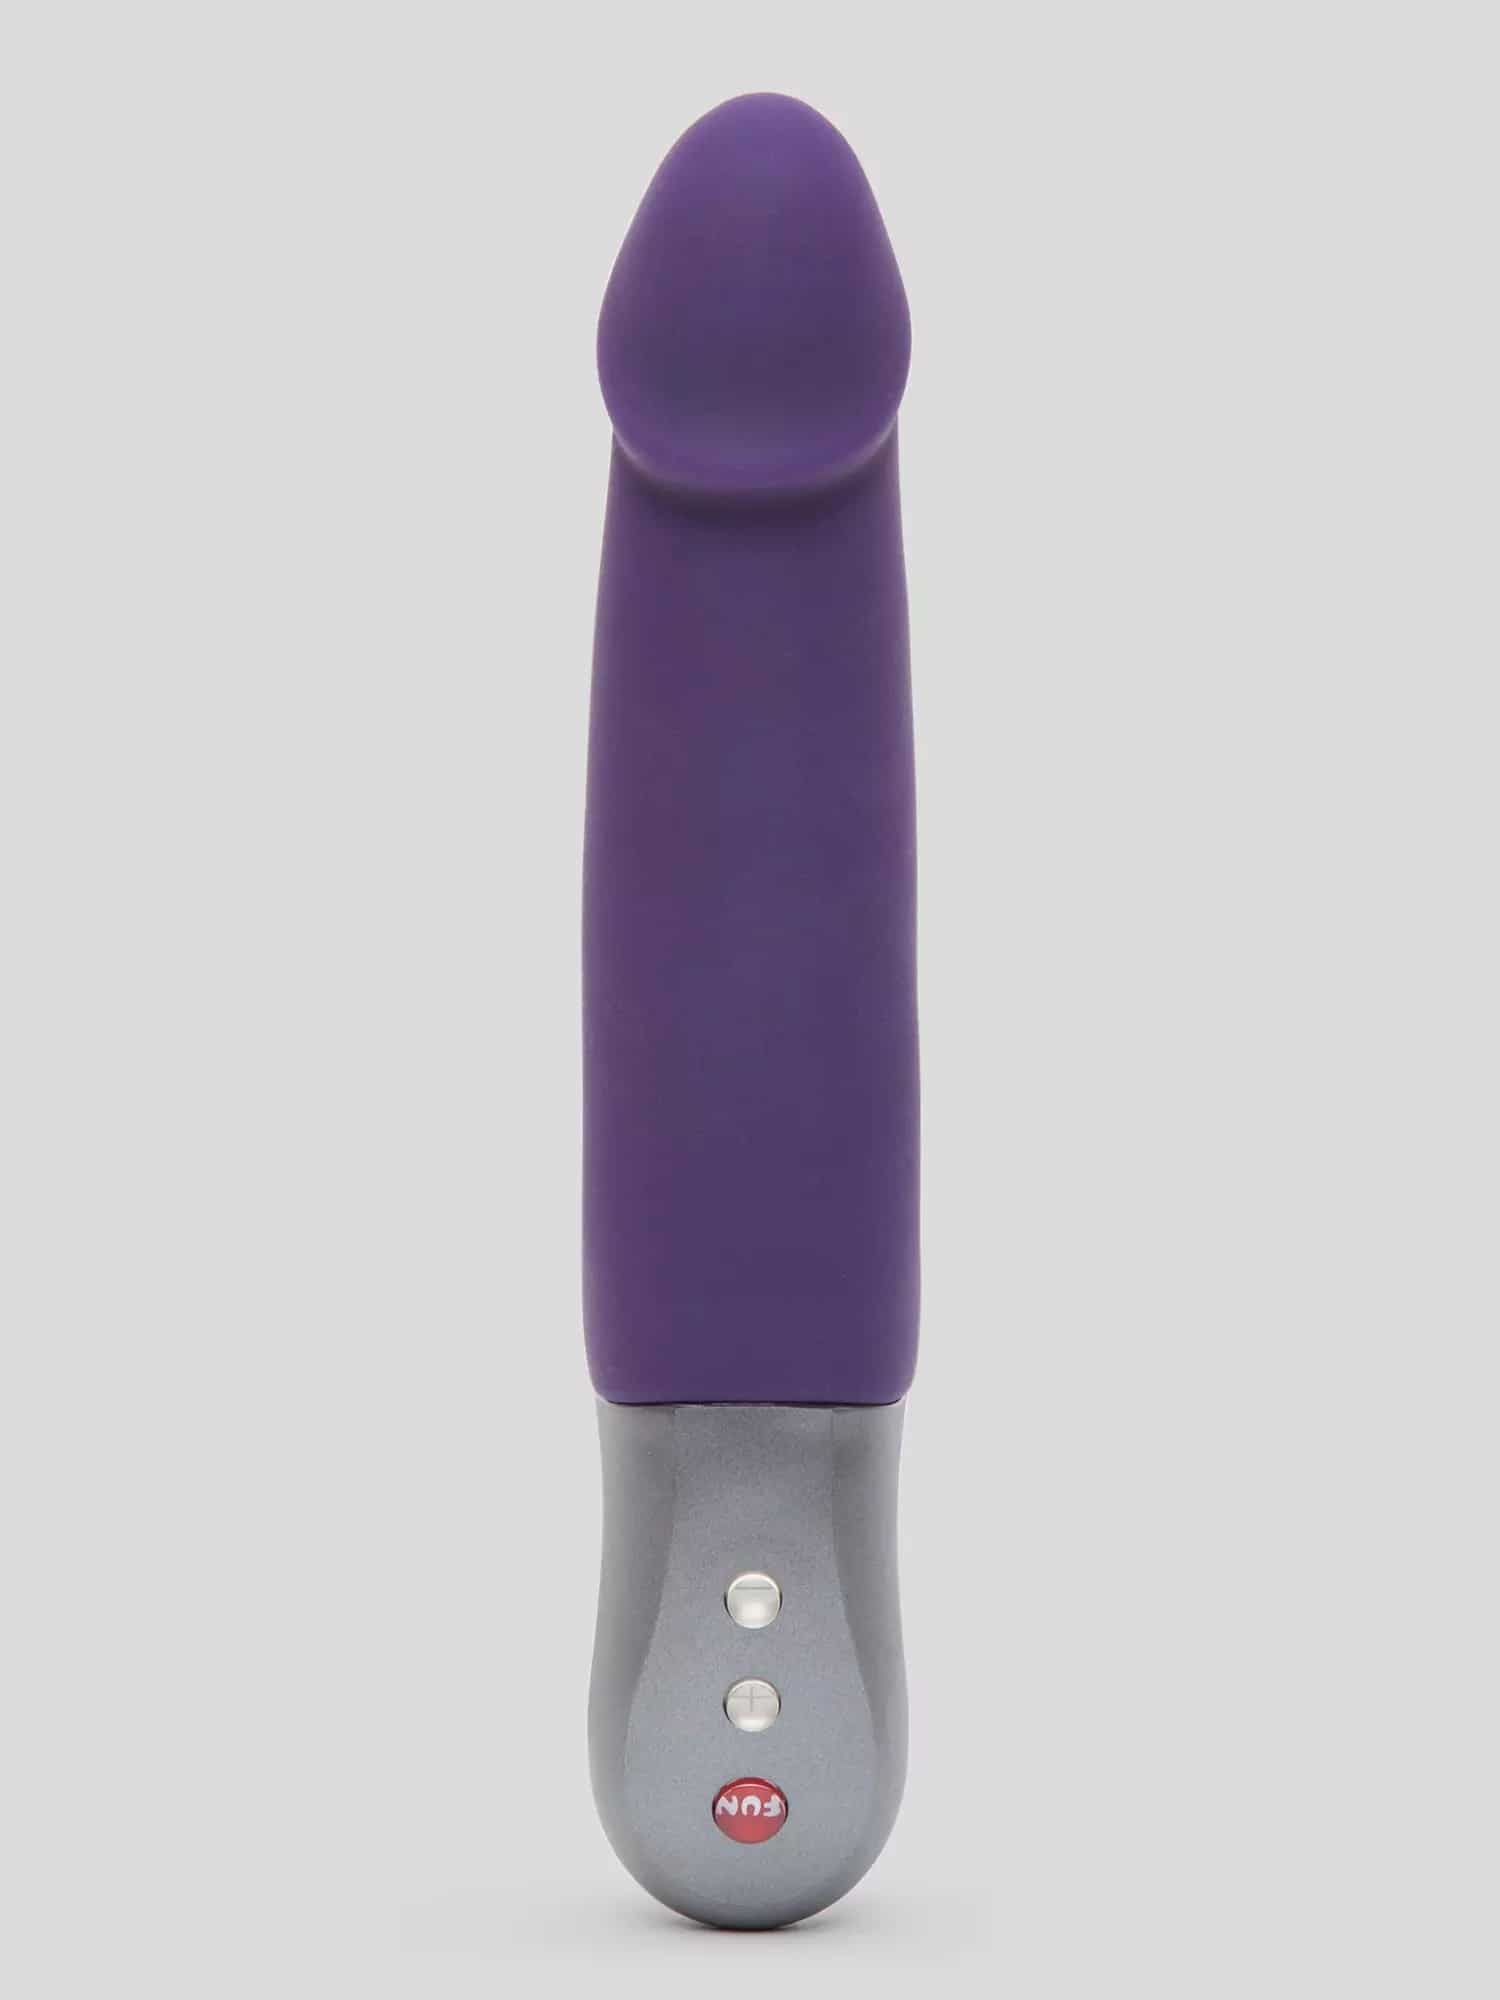 Fun Factory Stronic Real Rechargeable Realistic Thrusting Vibrator. Slide 3